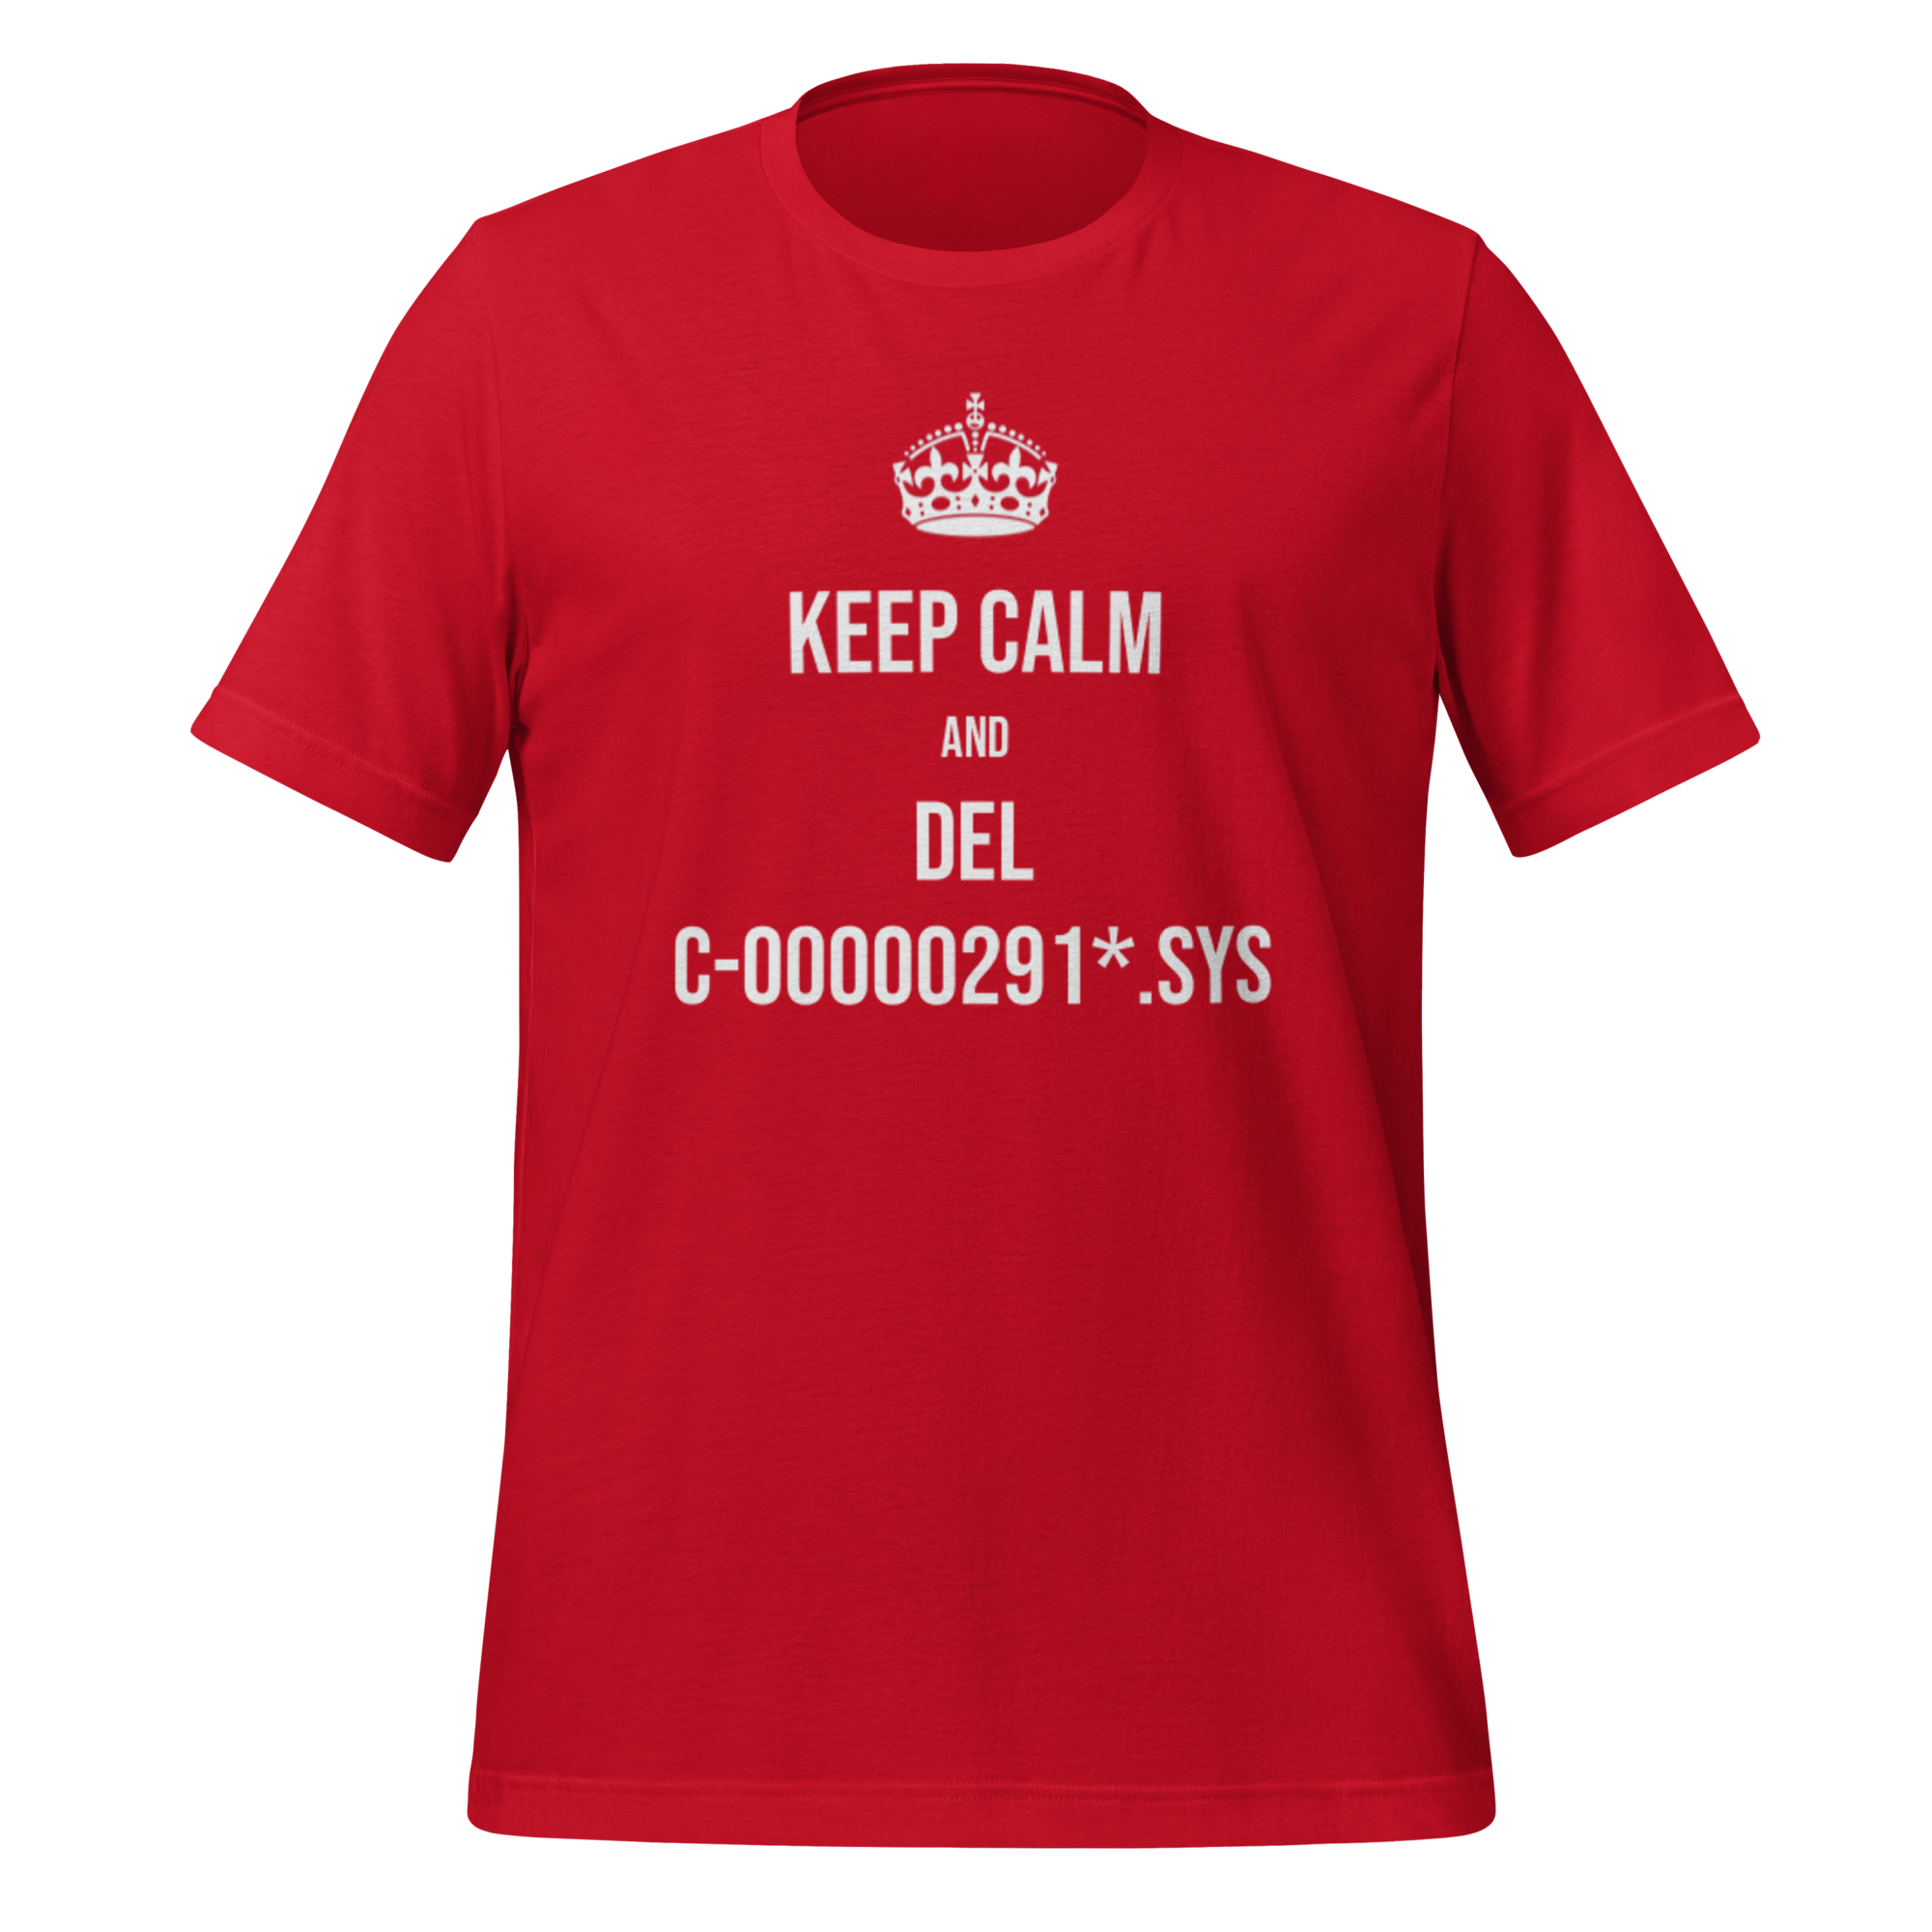 Keep Calm and del C-00000291.sys T-Shirt